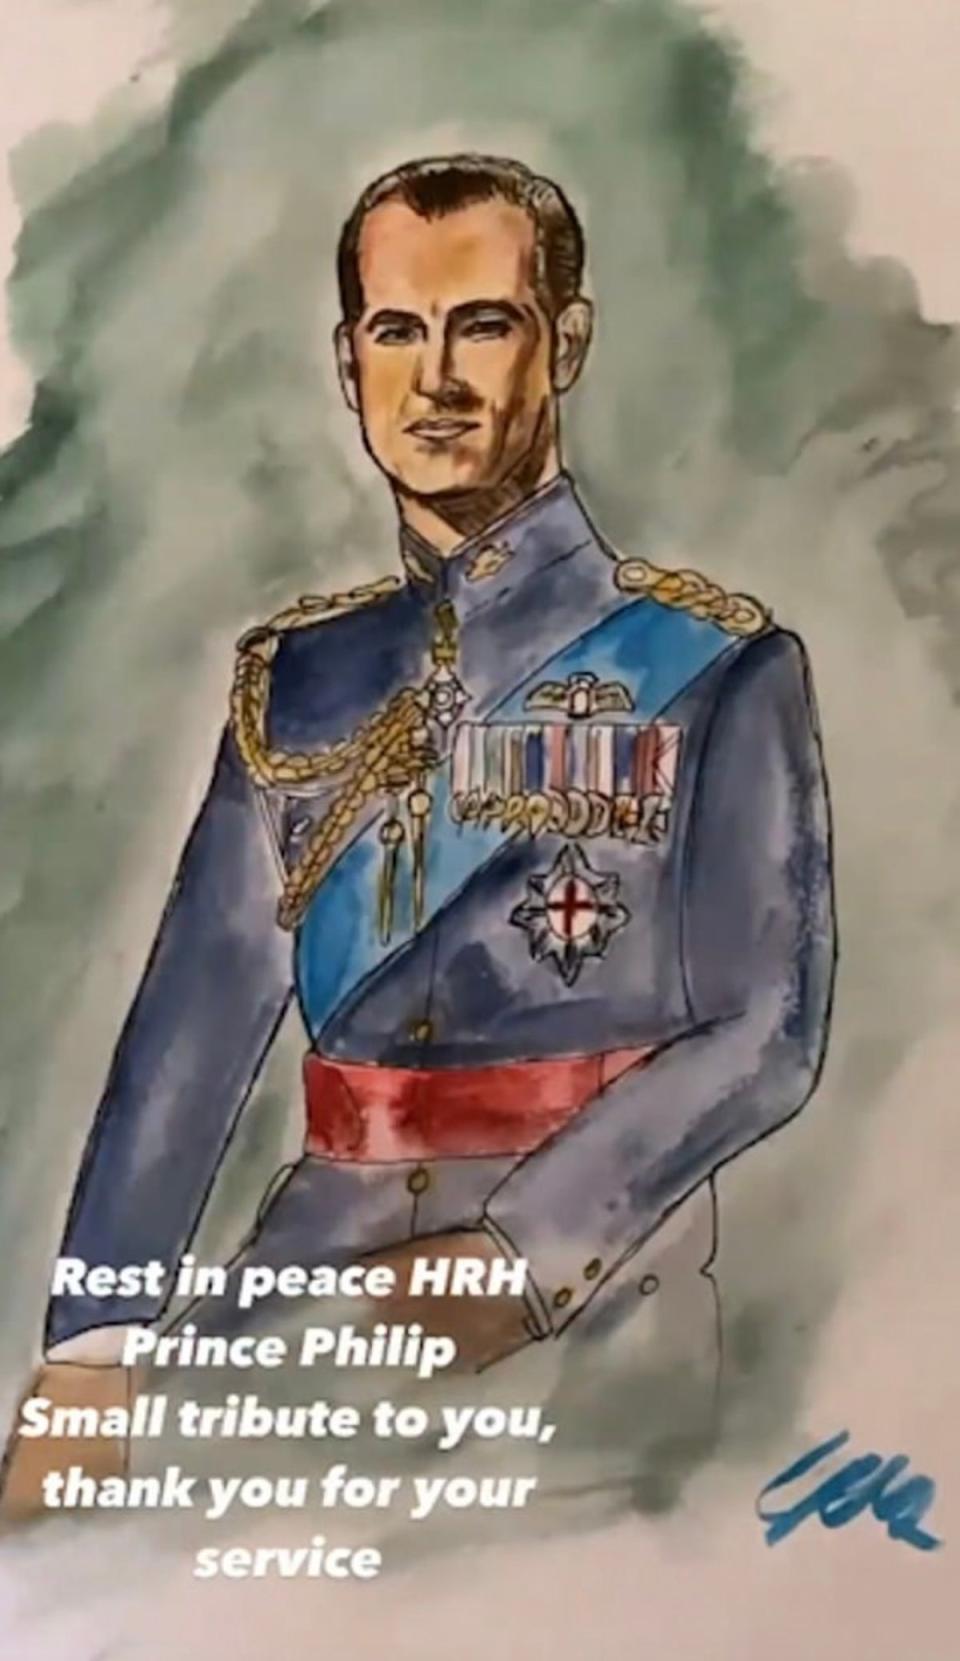 The singer shared his watercolour painting of Prince Philip shortly after he died last year (Liam Payne/Instagram)